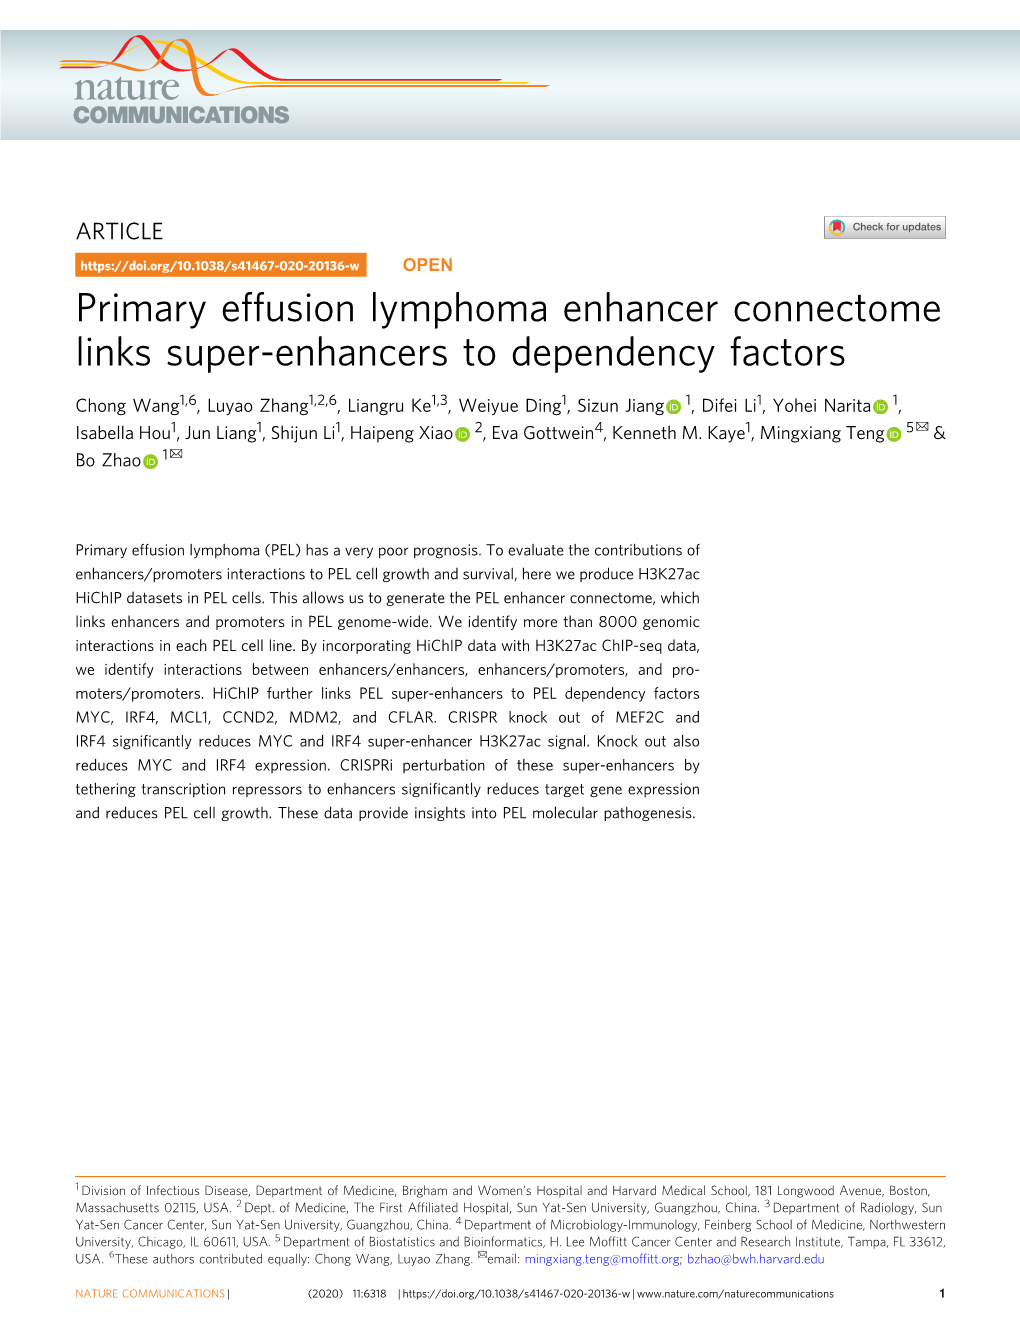 Primary Effusion Lymphoma Enhancer Connectome Links Super-Enhancers to Dependency Factors